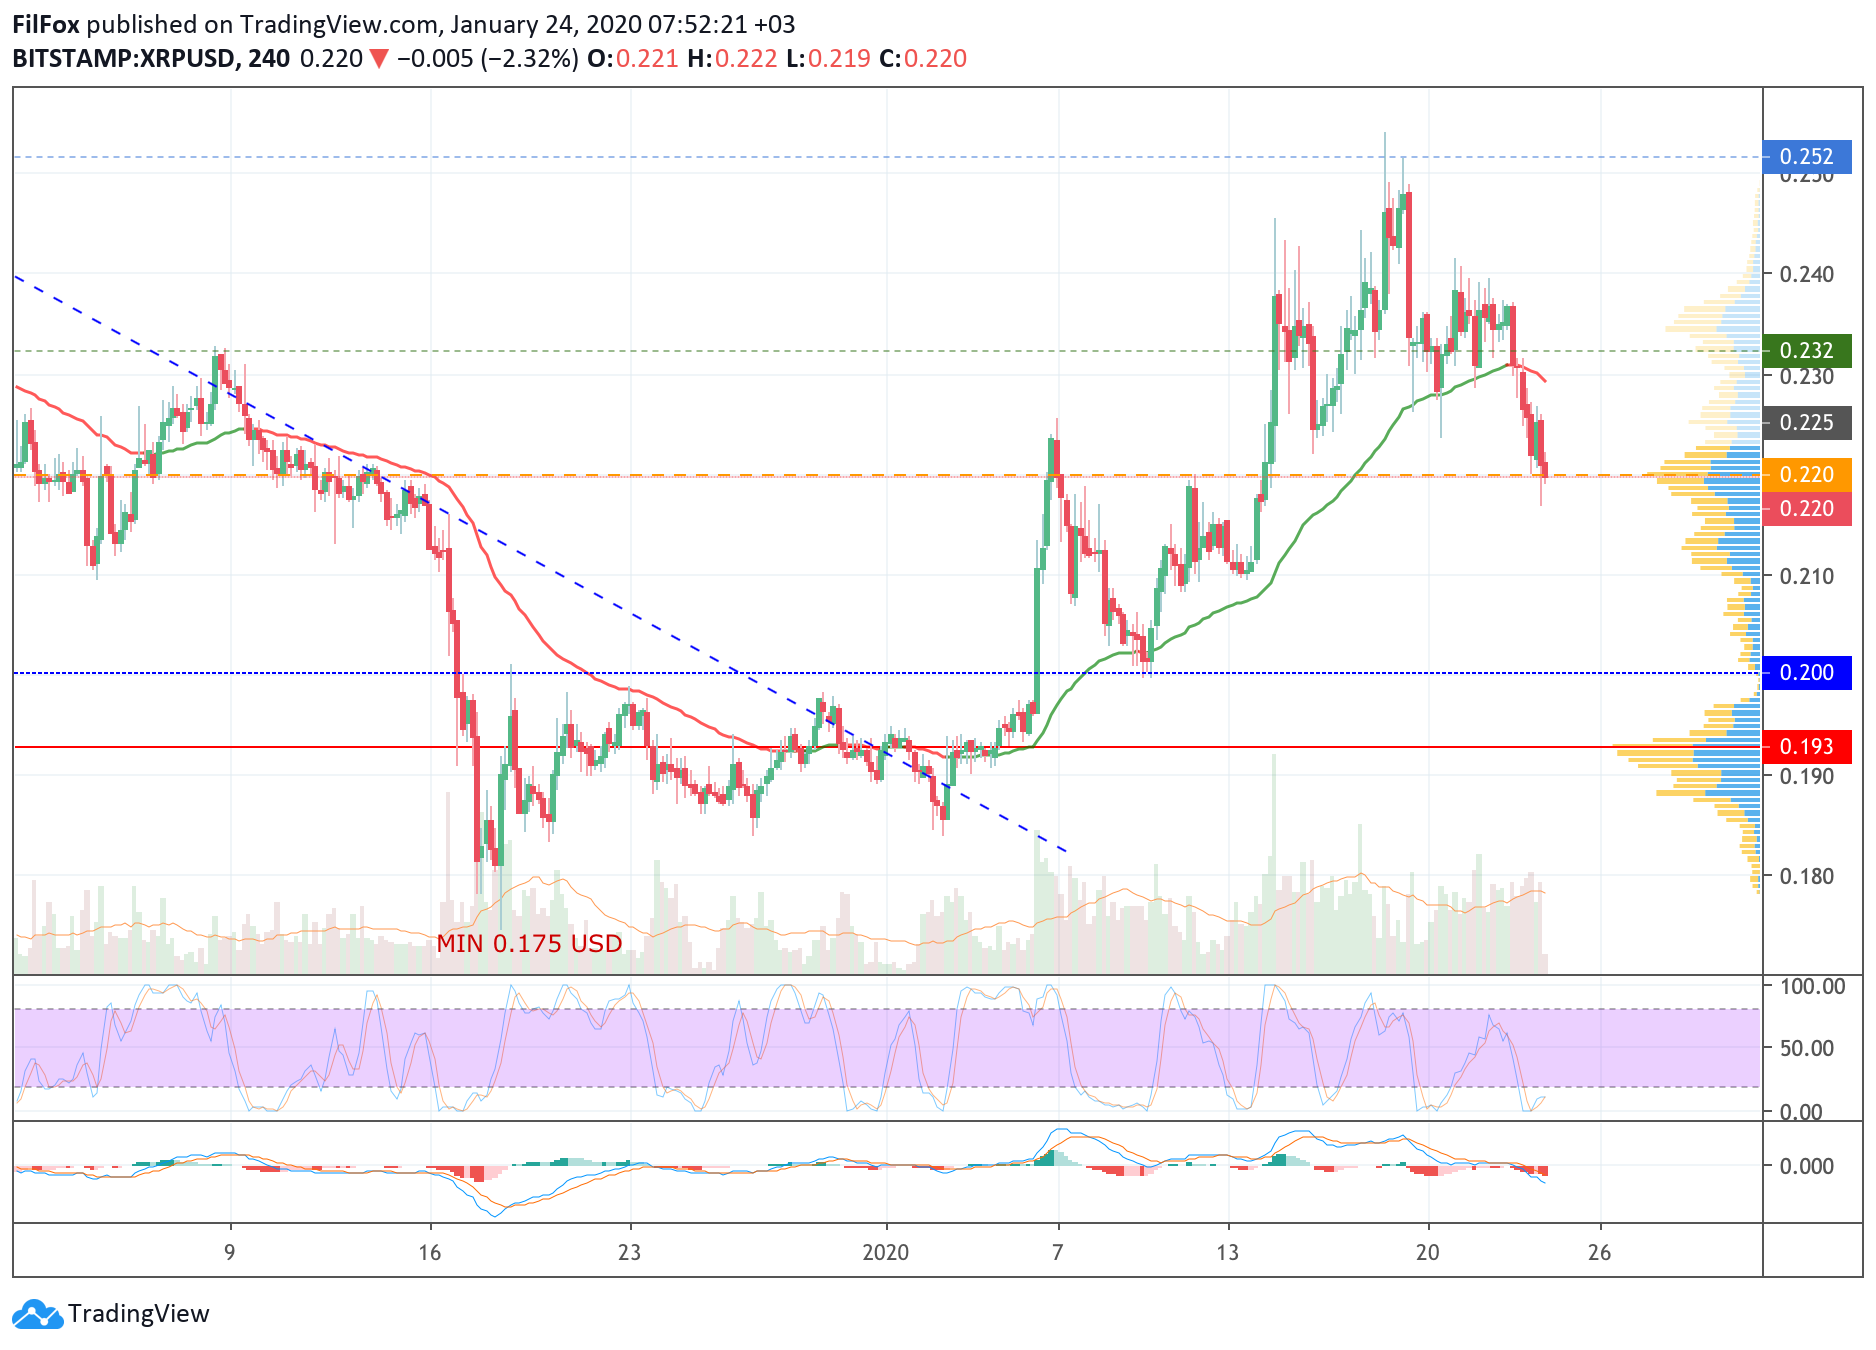 Analysis of cryptocurrency pairs BTC / USD, ETH / USD and XRP / USD on 01.24.2020